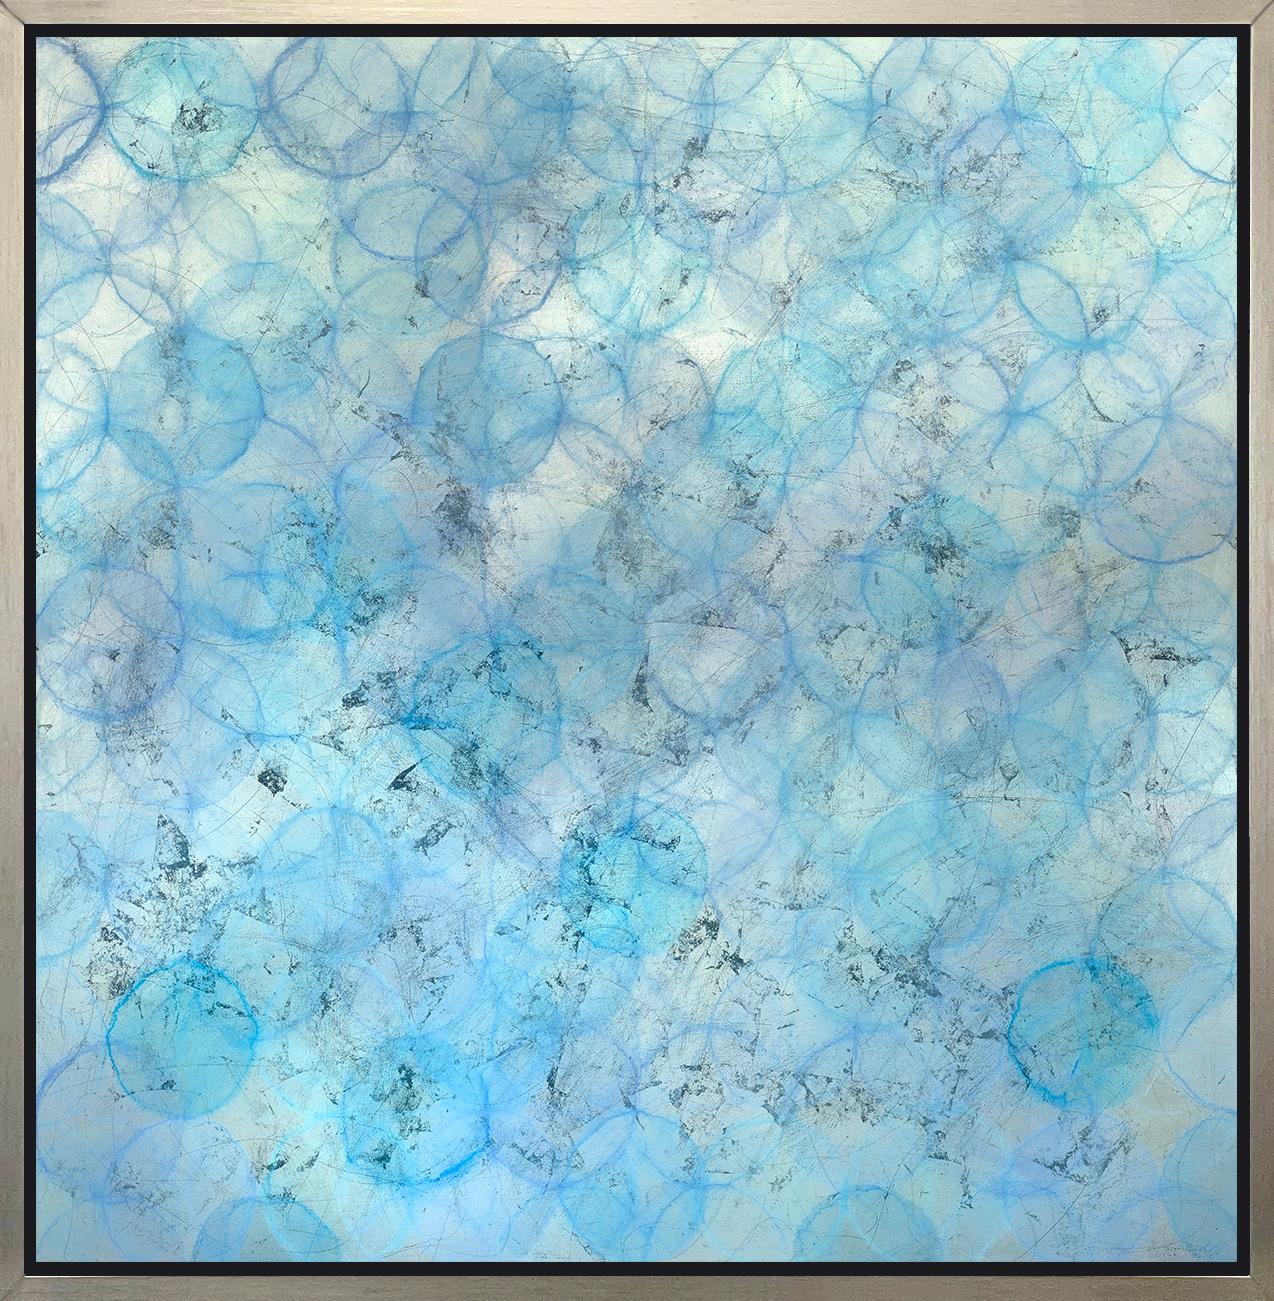 Roger Mudre Abstract Print - "Brunnera, " Framed Limited Edition Giclee Print, 36" x 36"